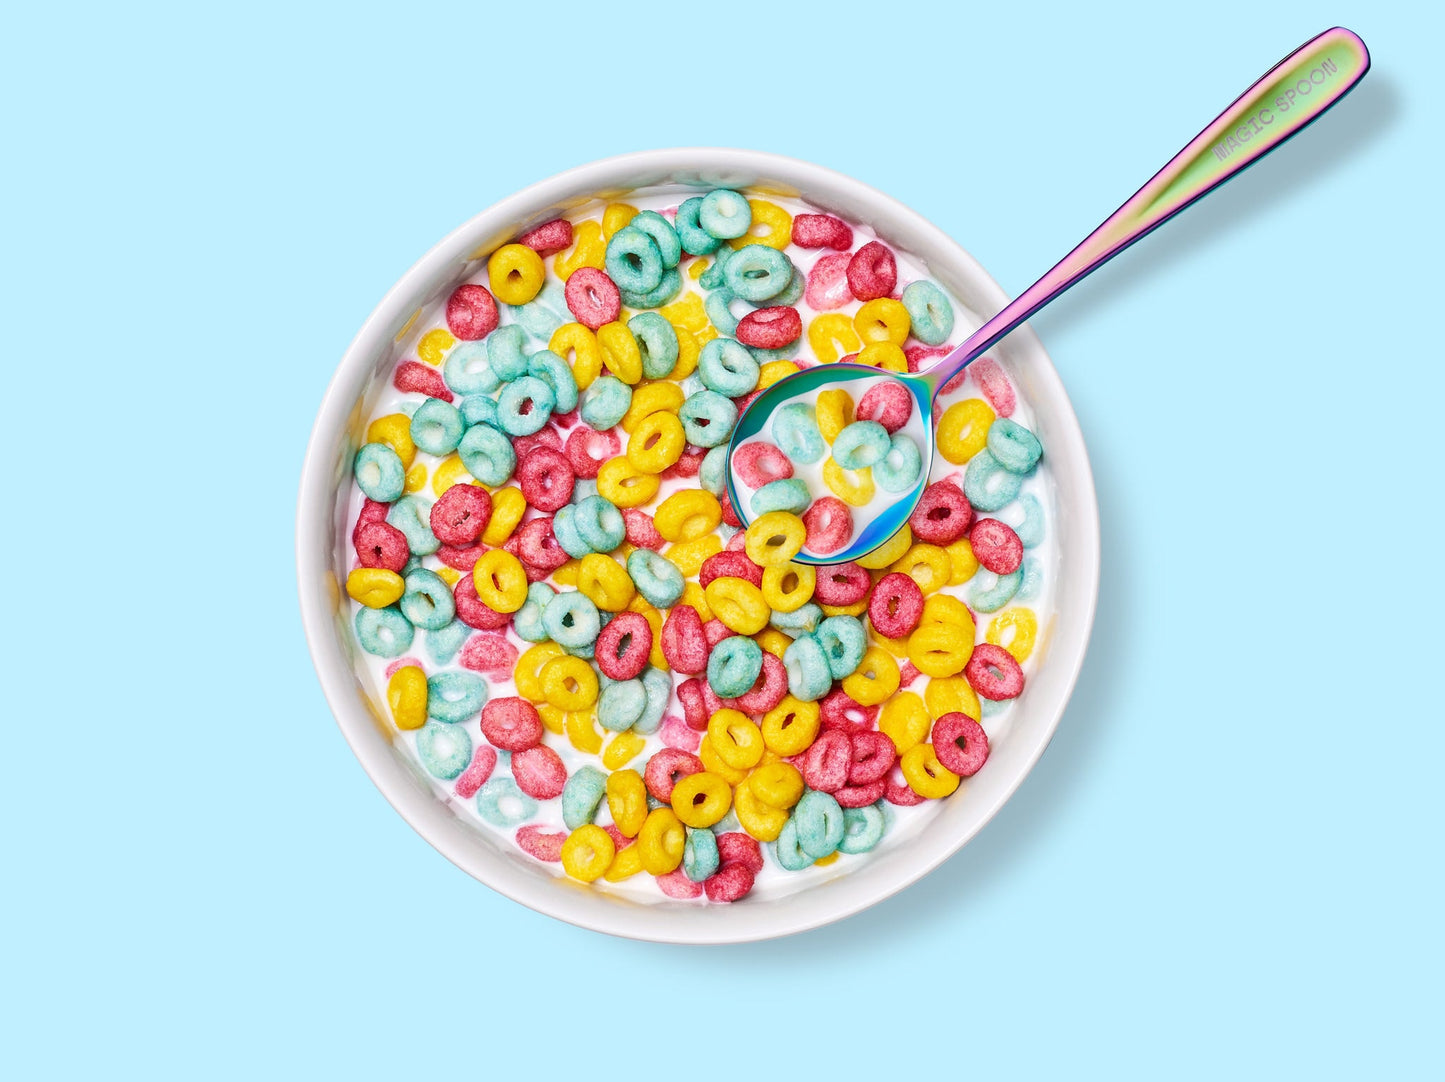 Fruity Cereal (7 oz)